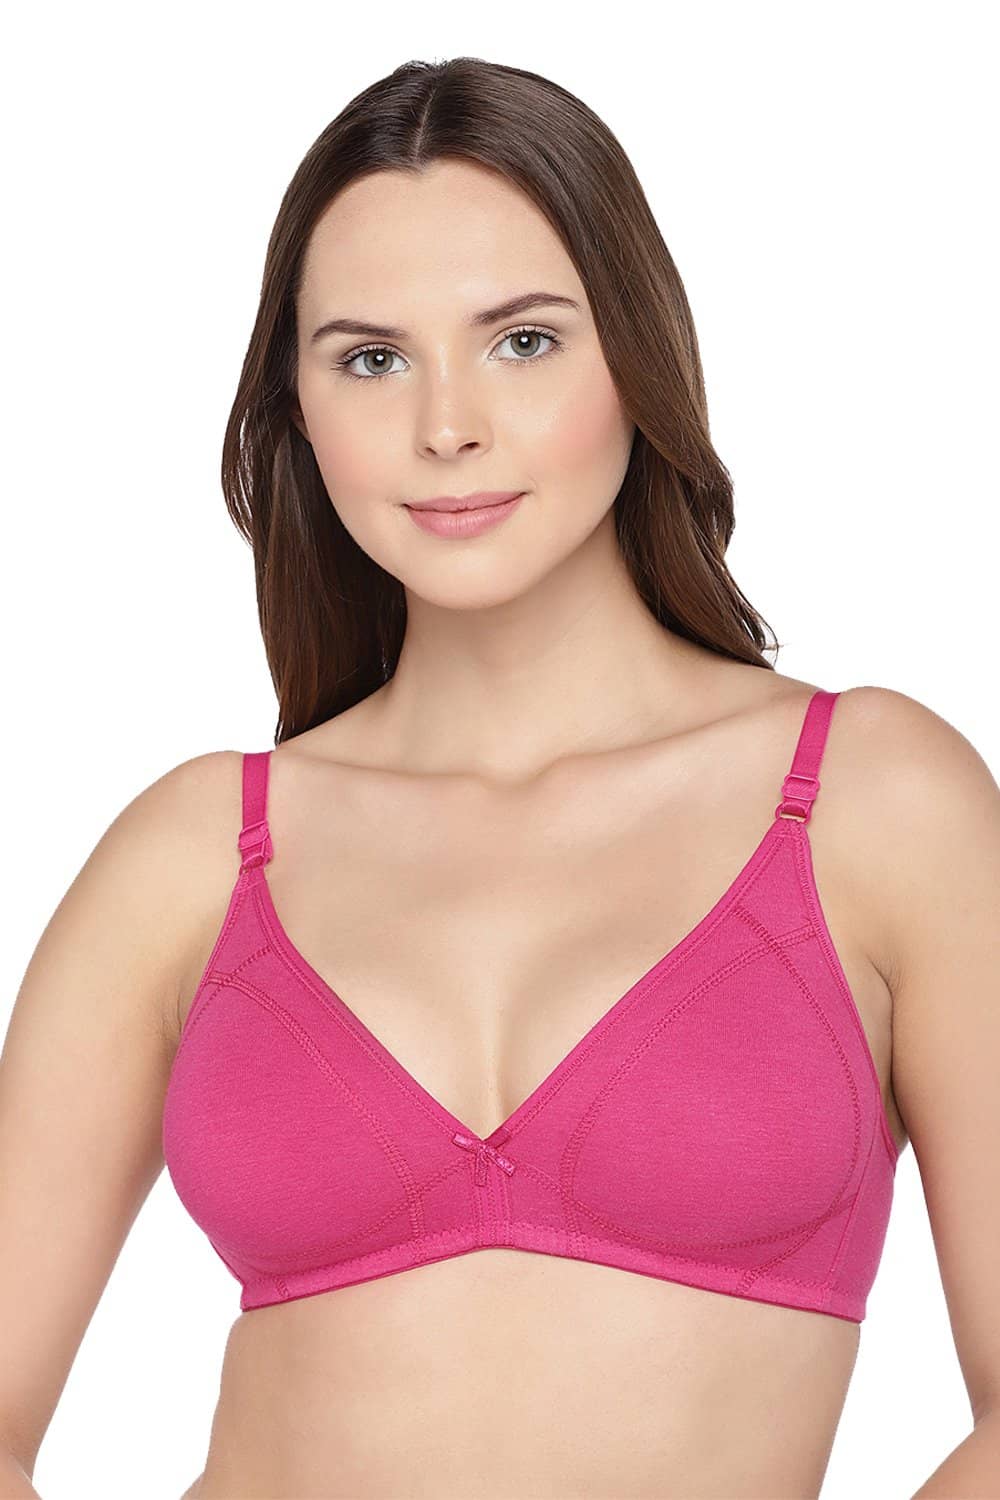 Organic Cotton Antimicrobial Seamless Triangular Bra with Supportive Stitch (Pack of 3)-ISB099-_M.White_M.White_Fuschia-